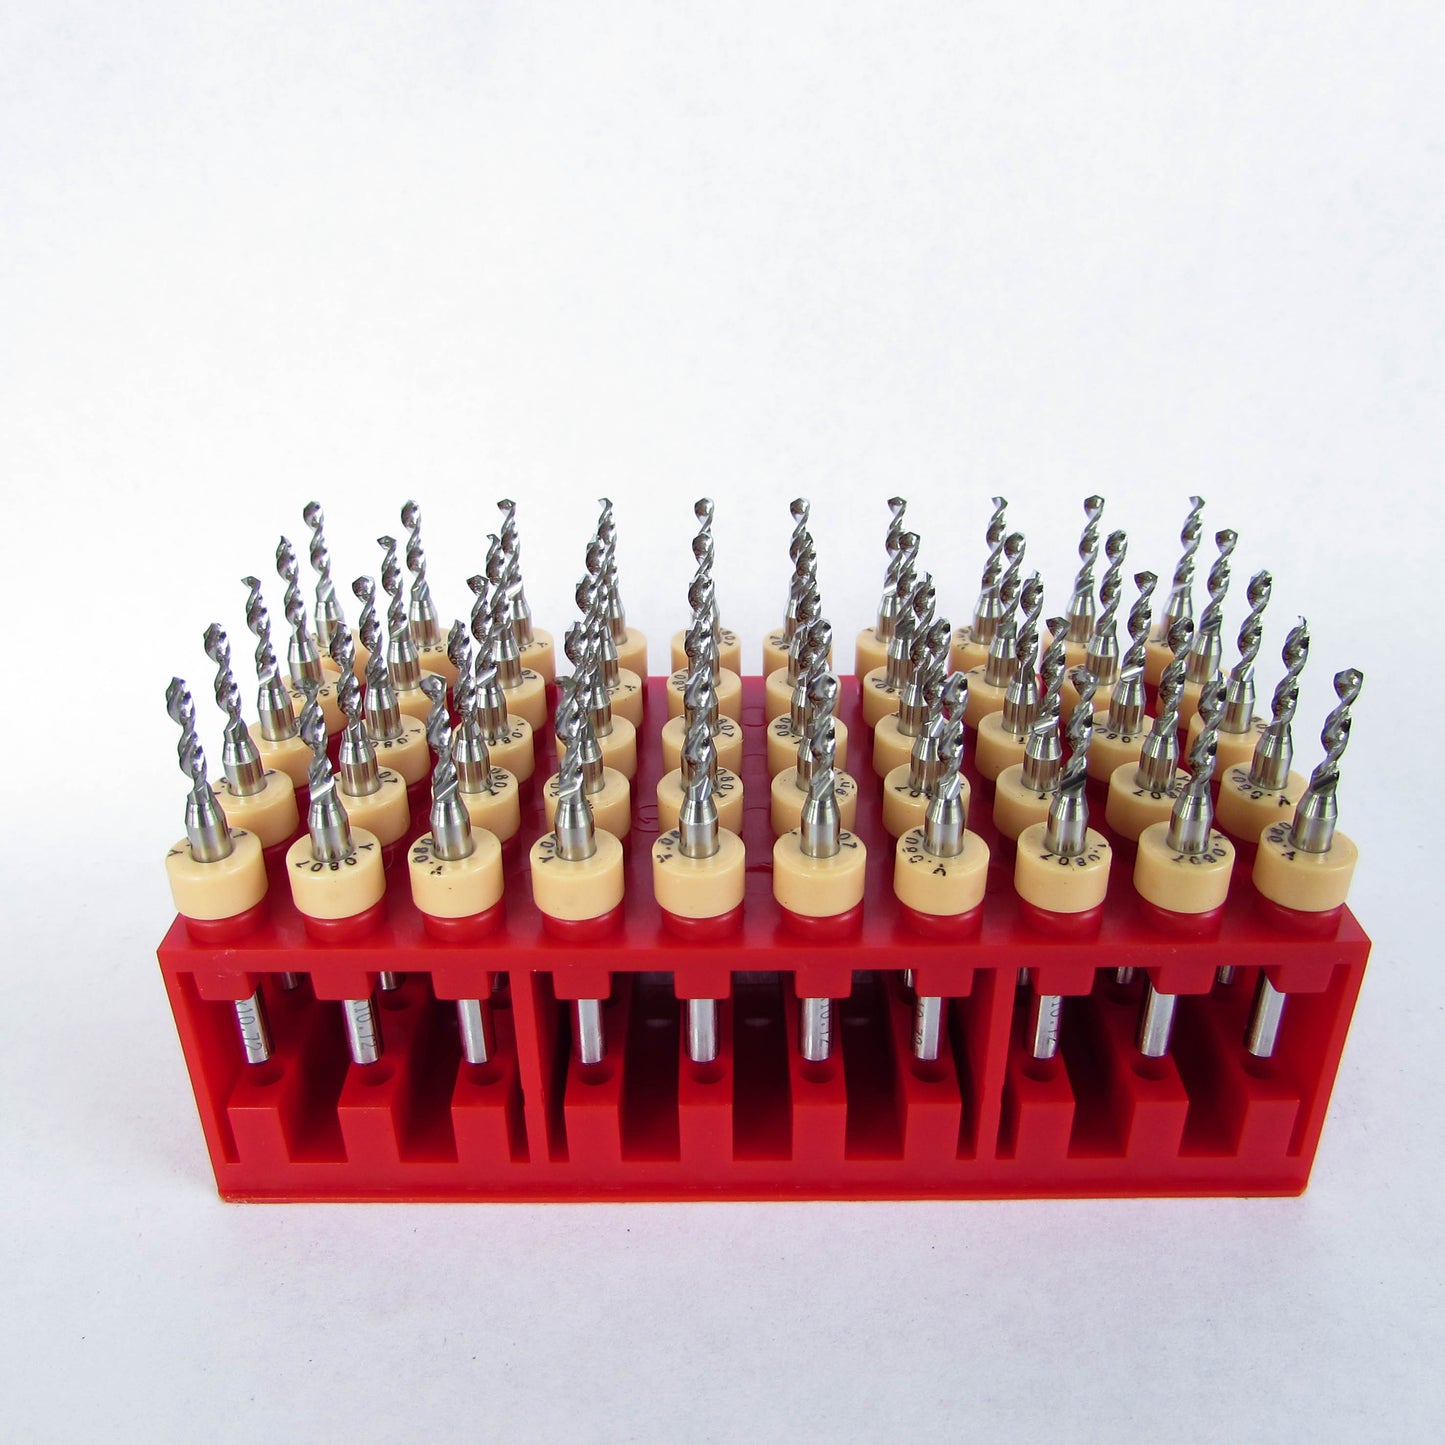 Bulk Lightly Used Drills - 50 Piece Boxes - Super Value for Hobby, Prototyping and Light Industrial Use - Choose the Size...